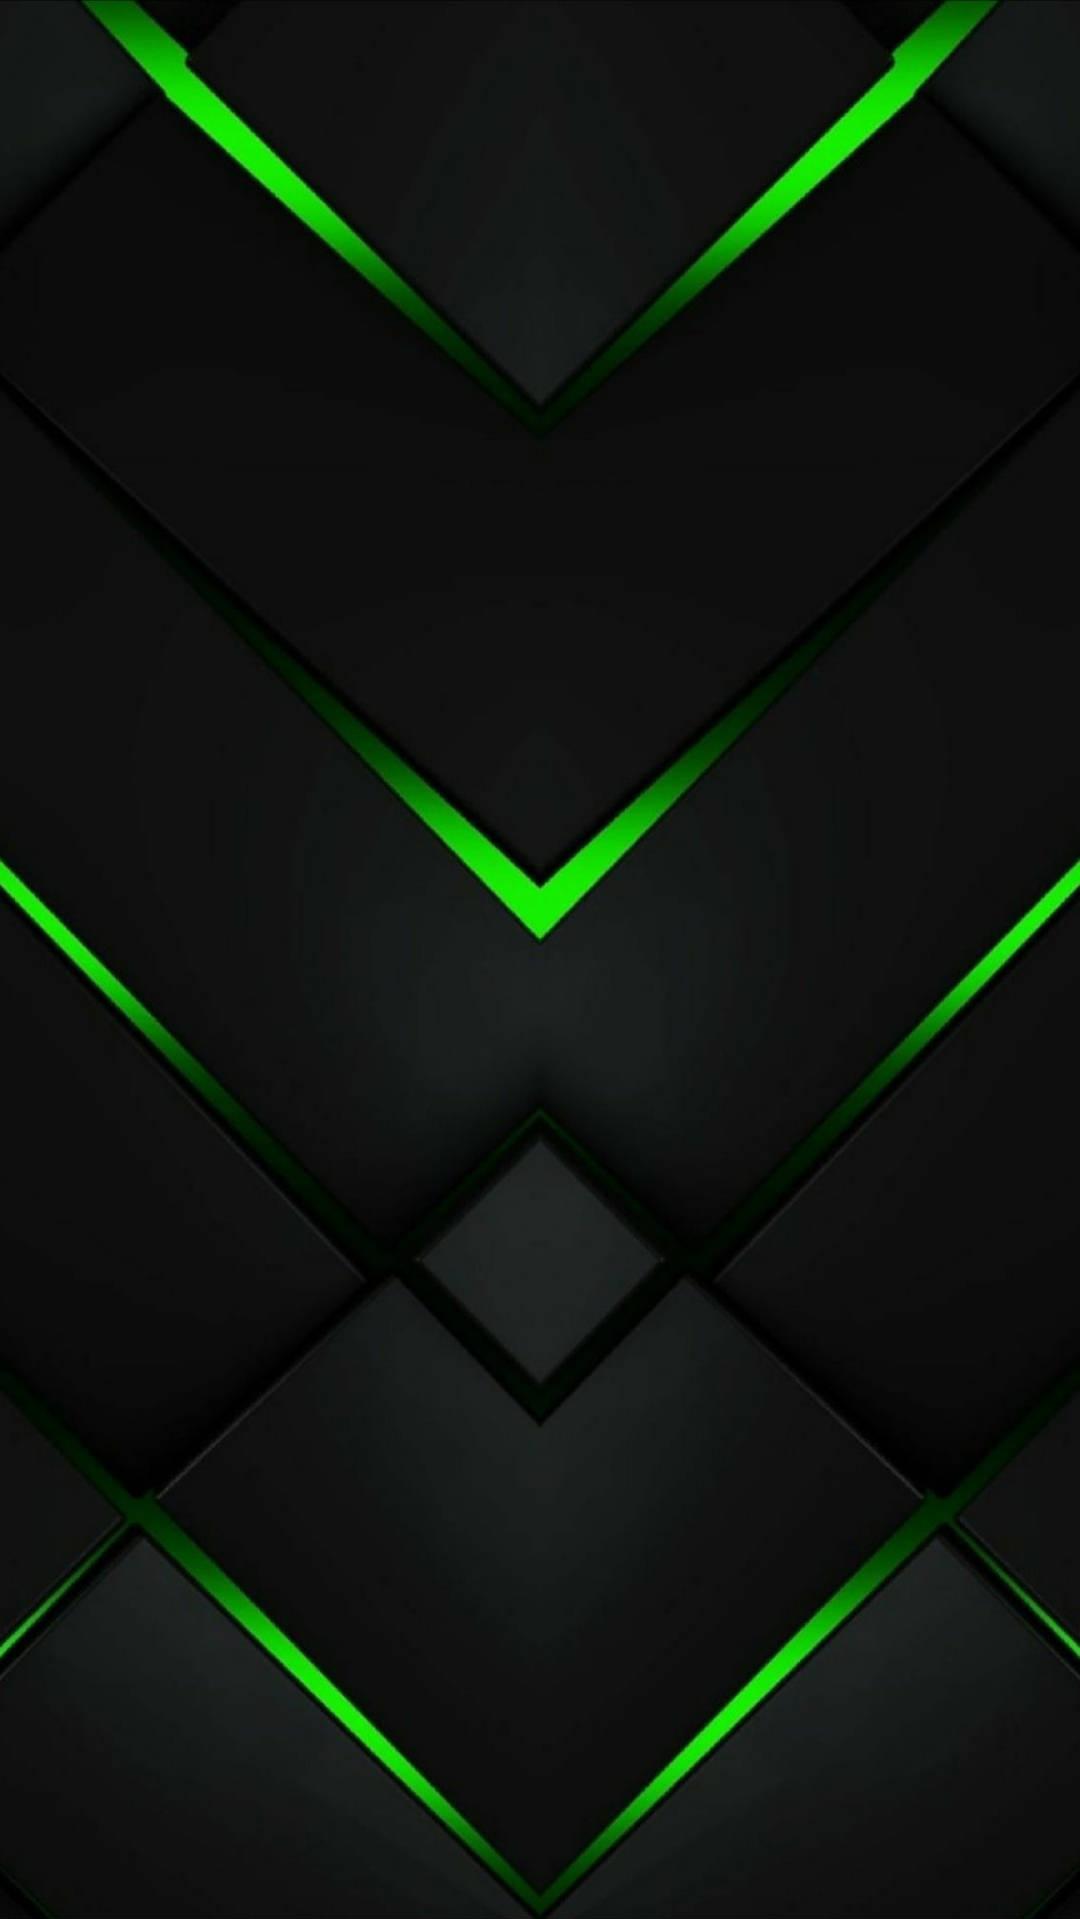 3d Material Neon Green And Black Pattern Wallpaper